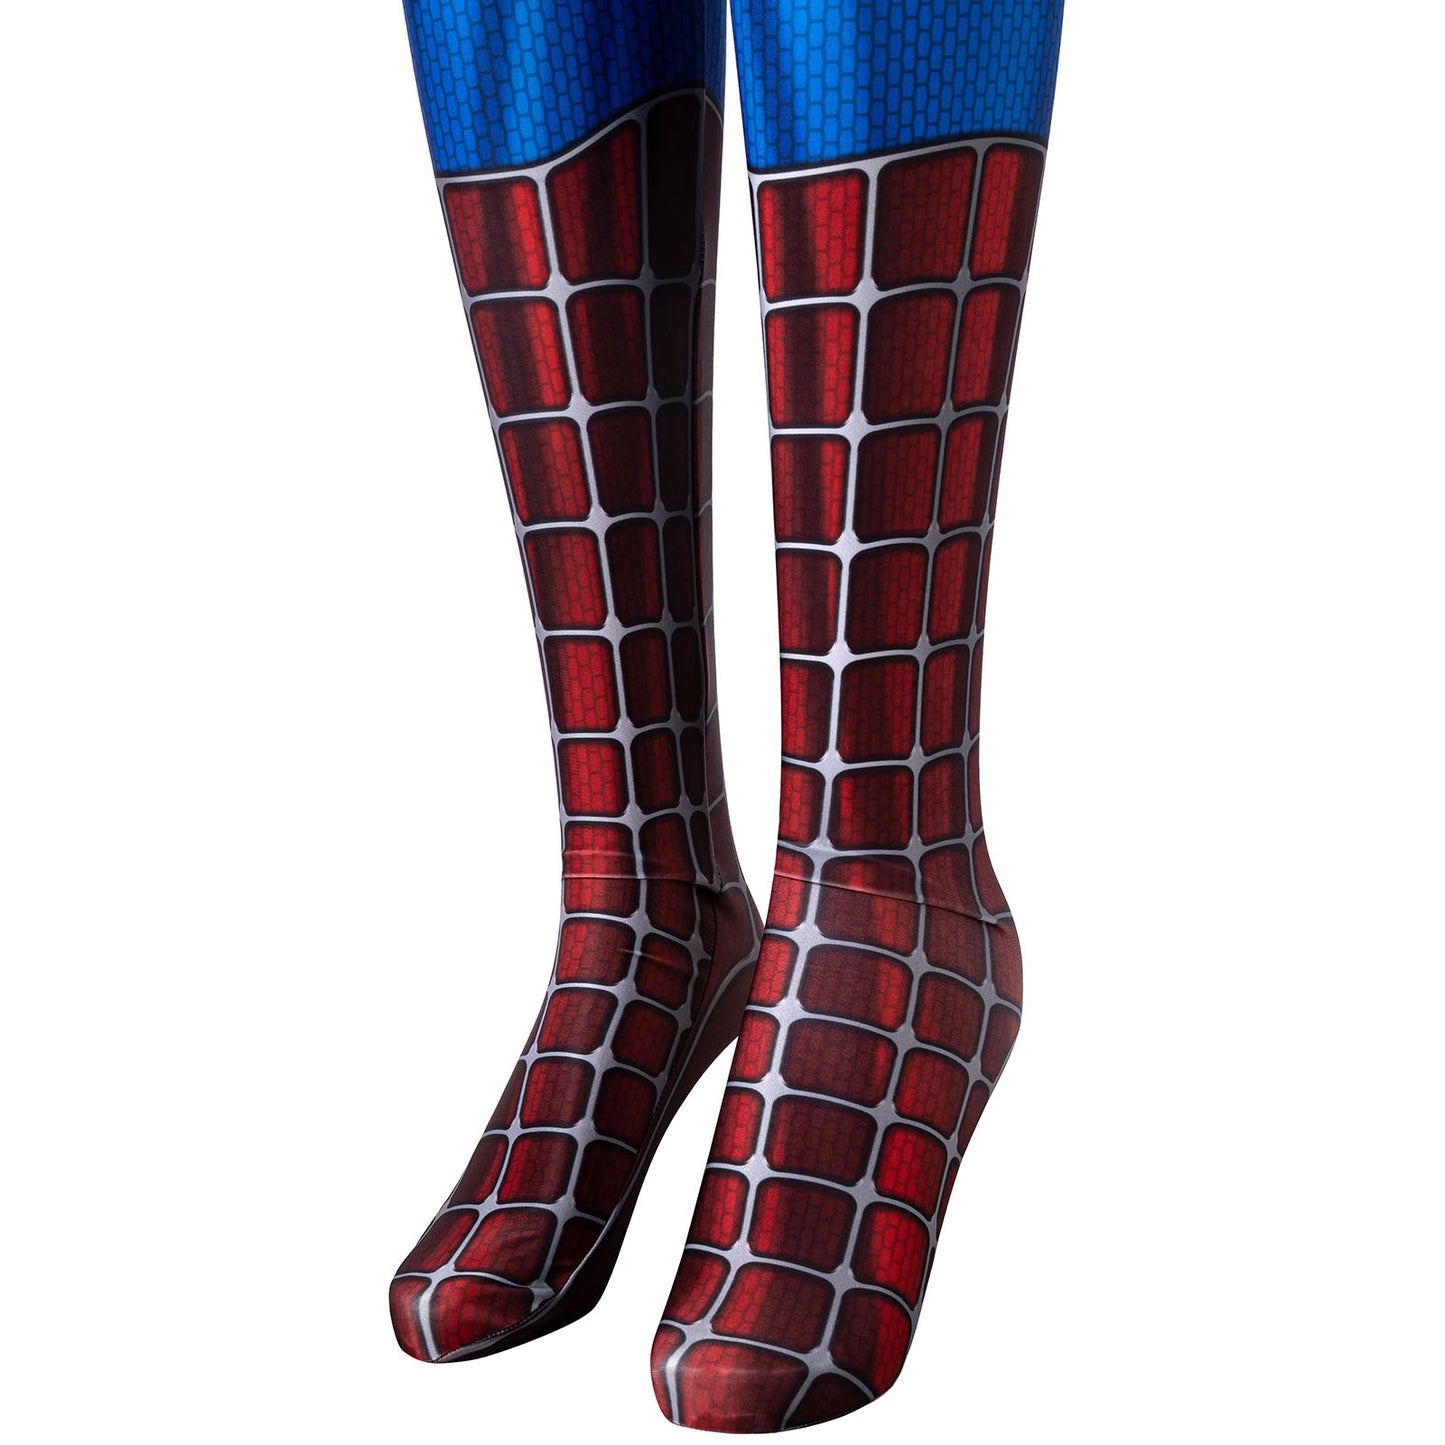 Spider-Man Peter Parker Tobey Maguire Female Jumpsuit Cosplay Costumes